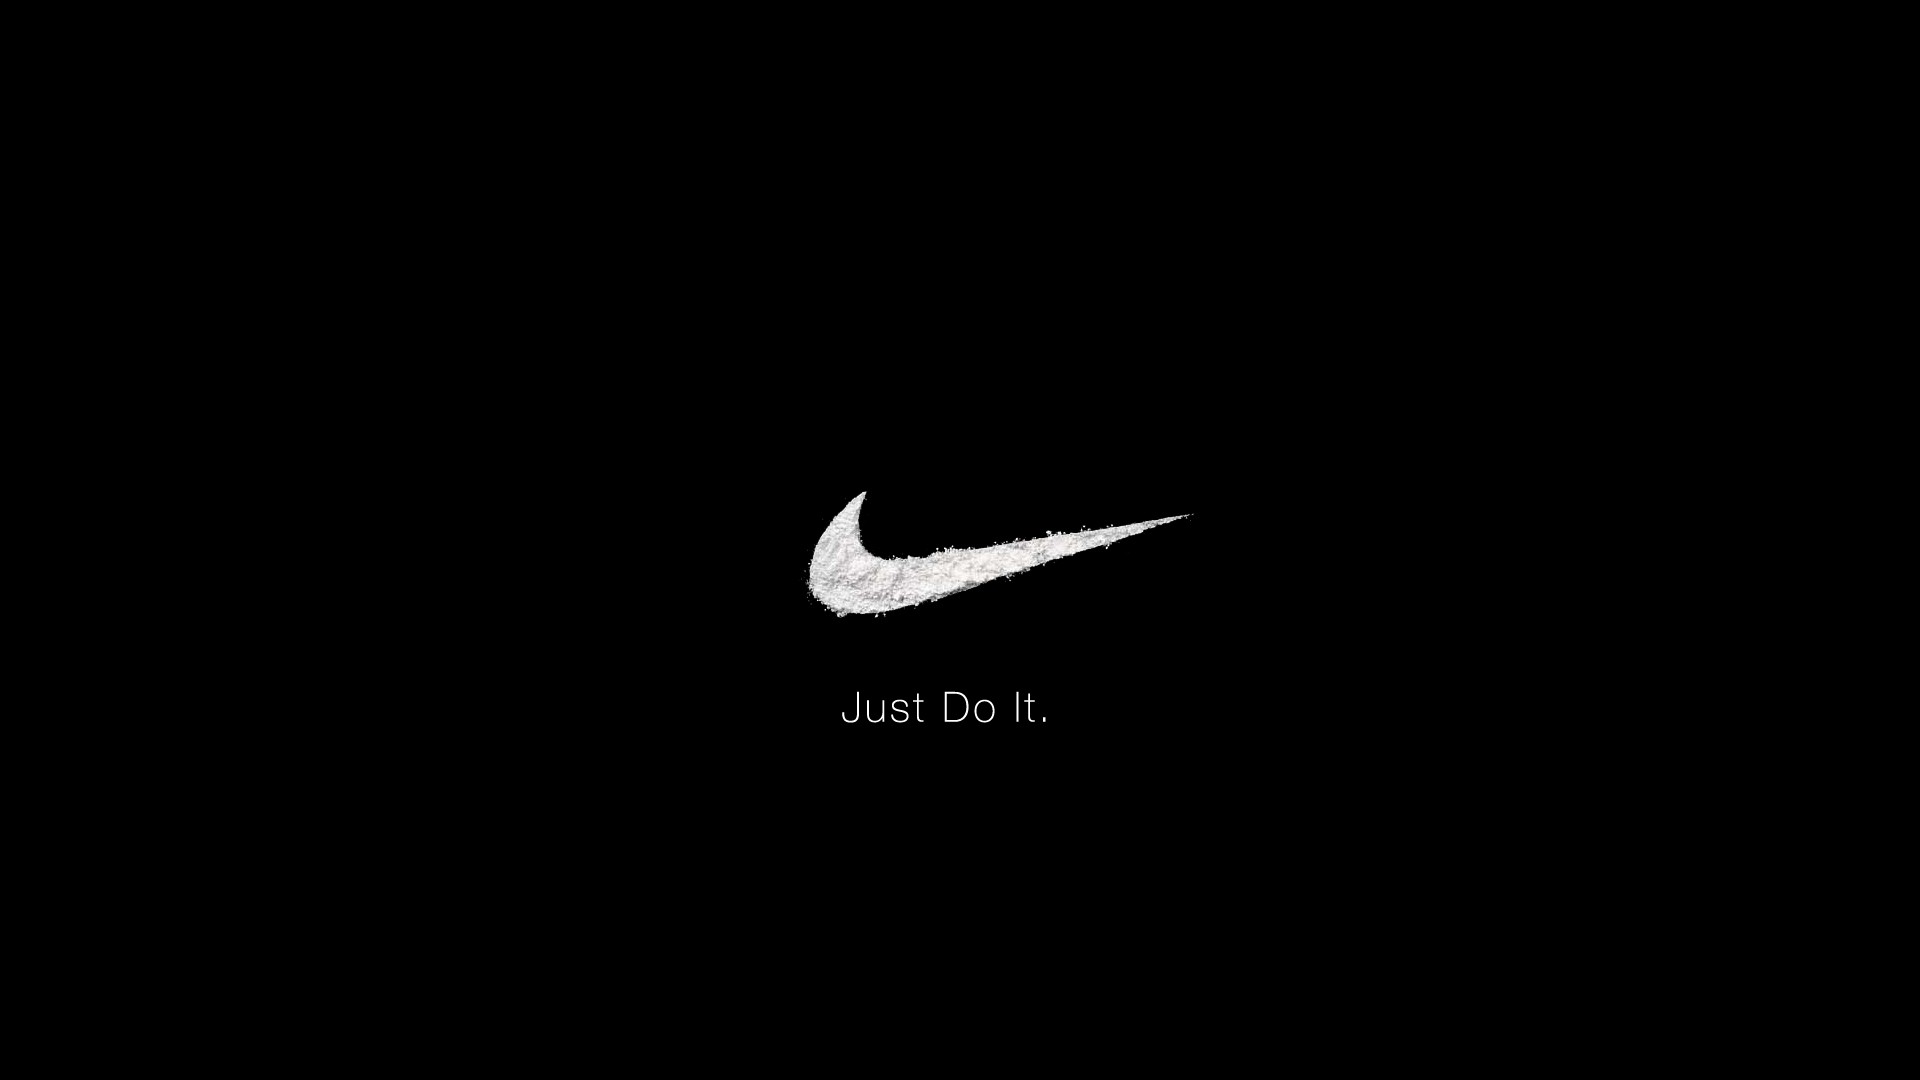 justice Nike slogan logos Just do it wallpaper background 1920x1080